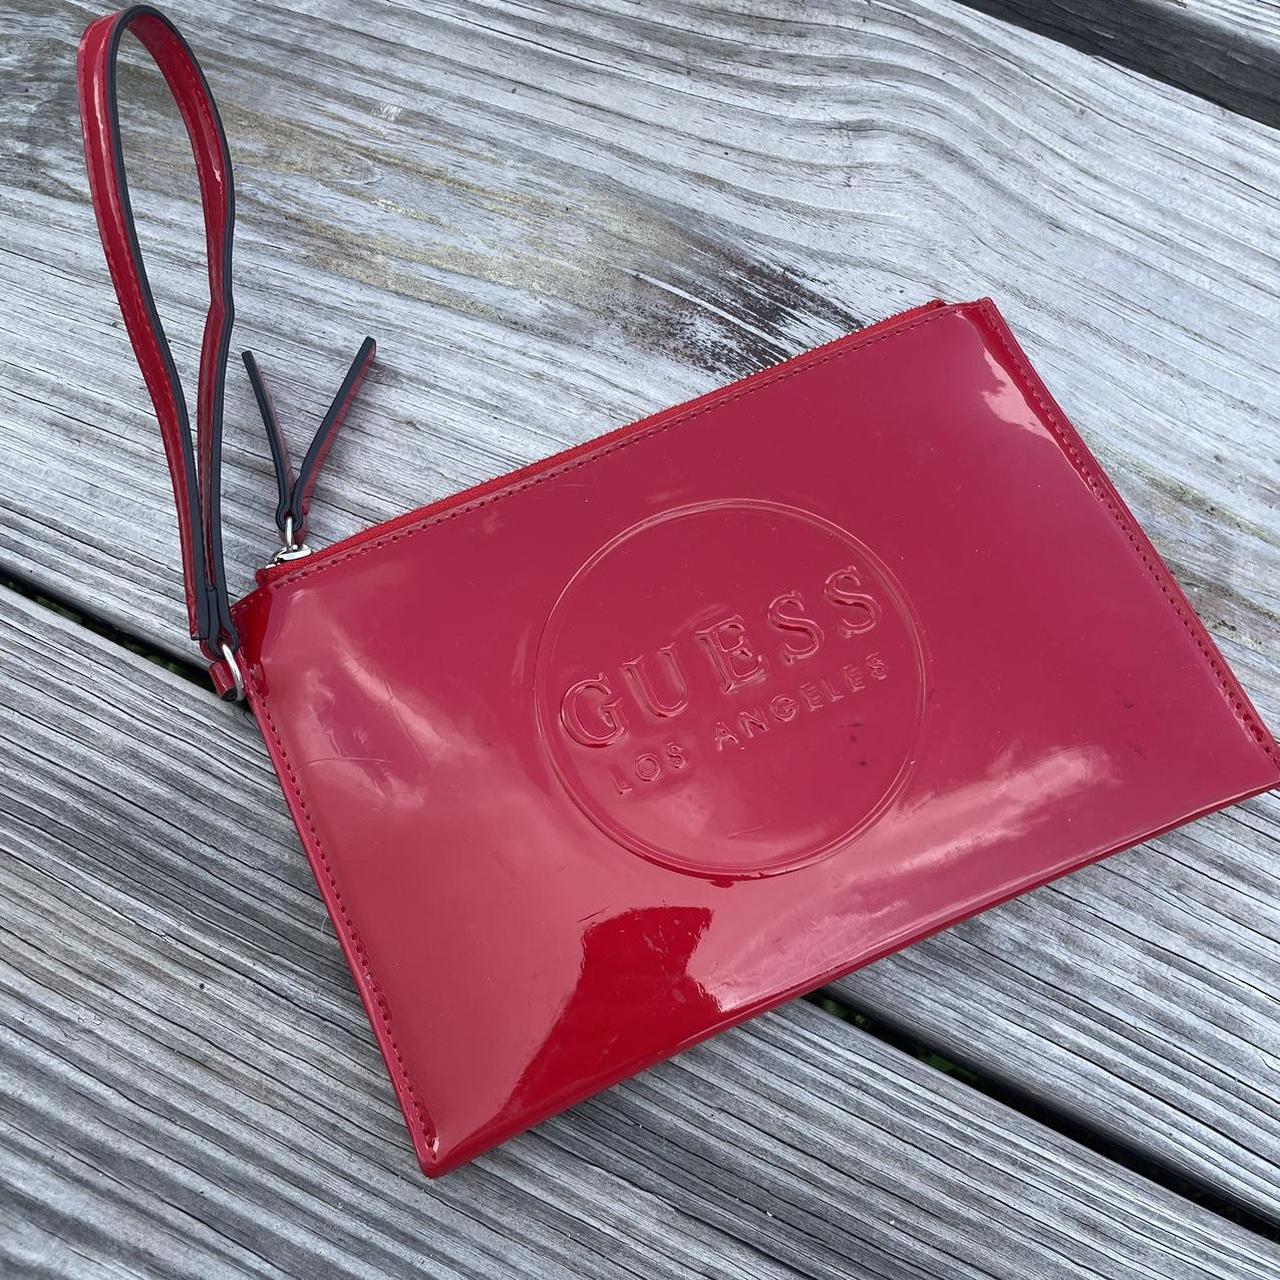 Guess Women's Going Out Bag - Red